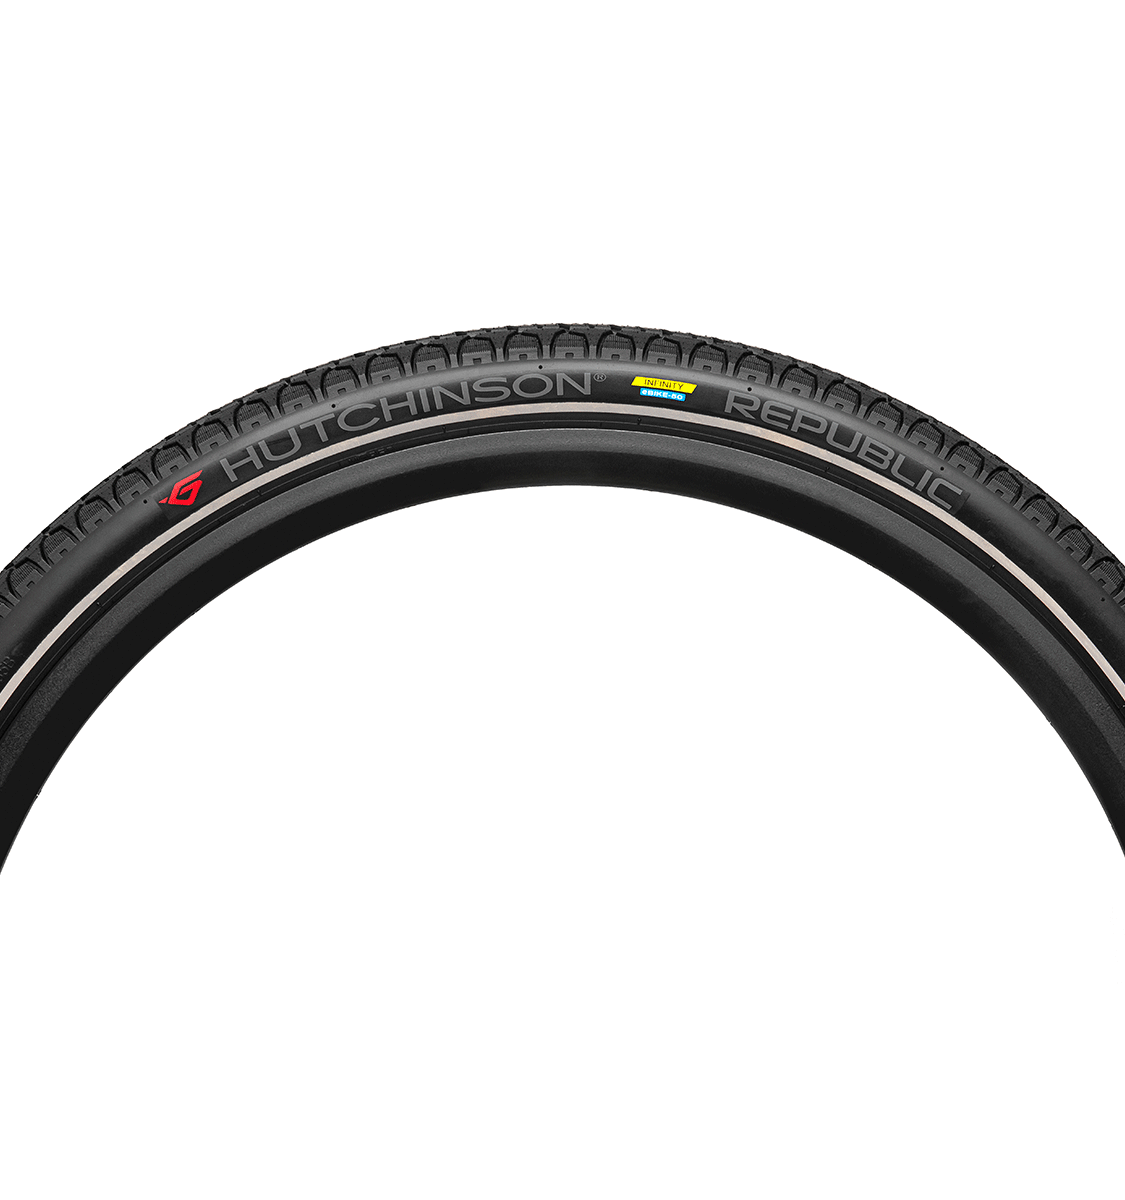 Hutchinson's Infinity E-Bike Republic Tyre for Optimal Riding Experience